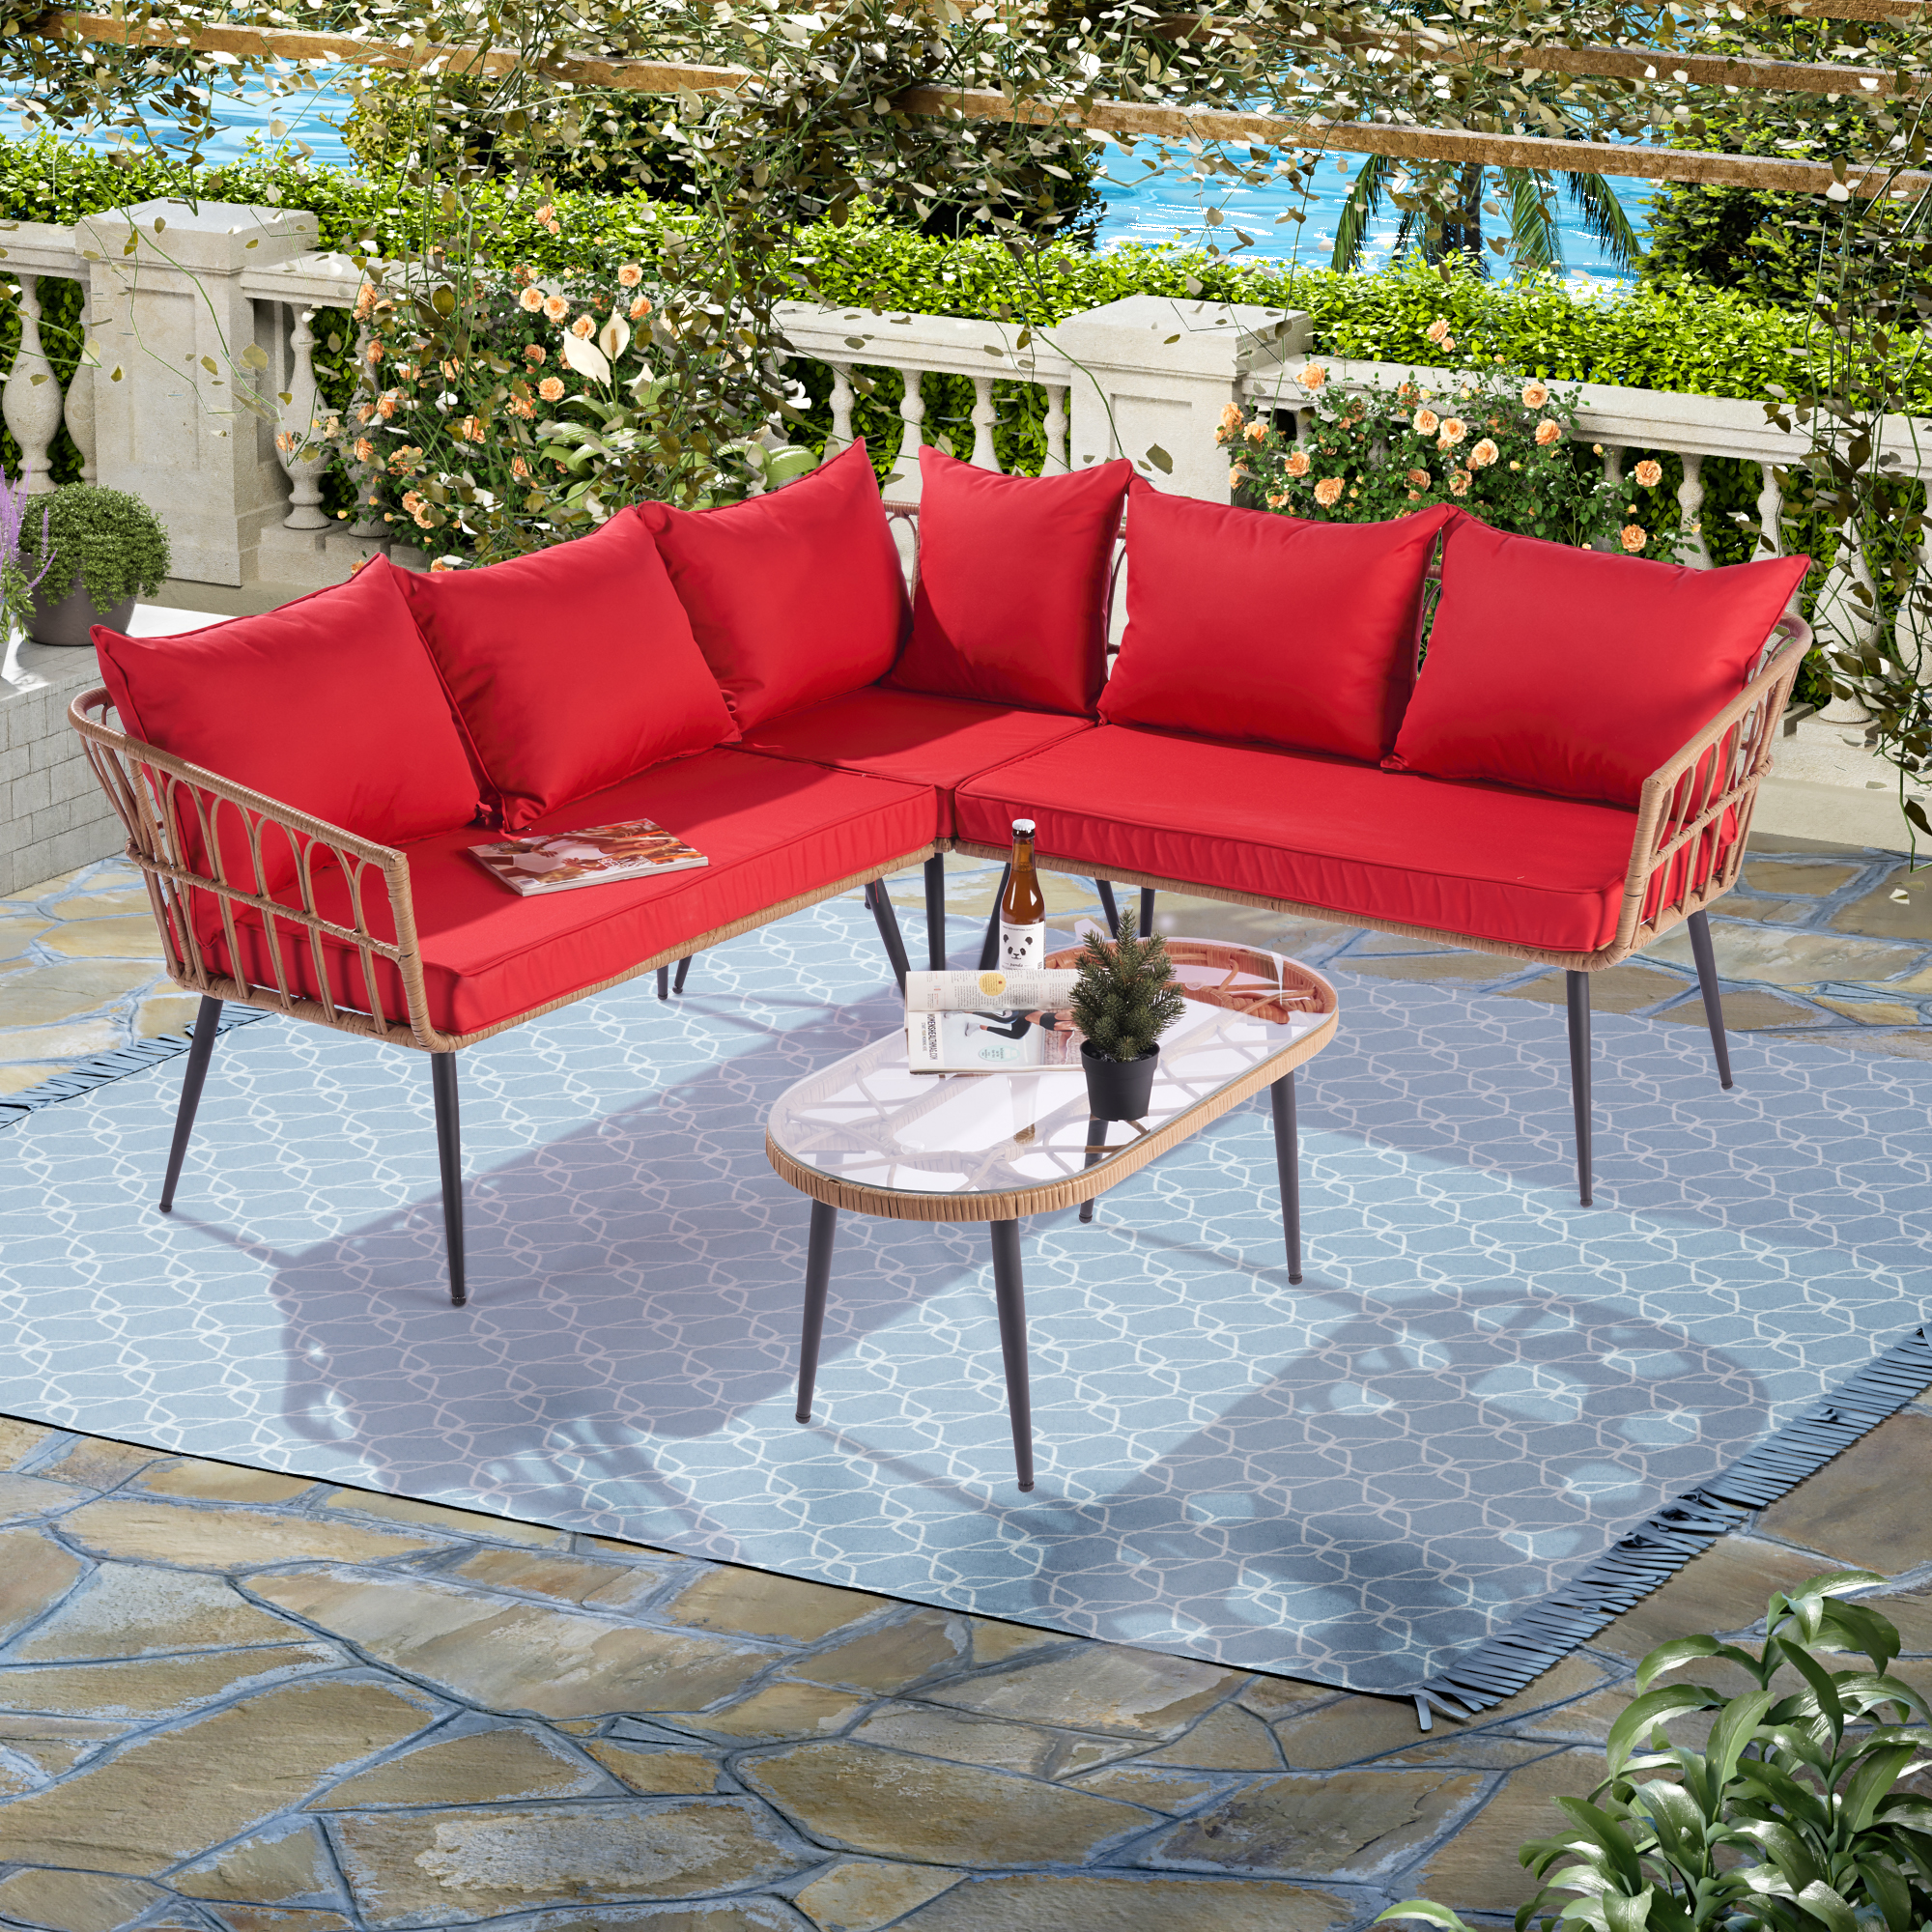 Wicker Patio Furniture Sets on for Backyard, 2023 Upgrade New 4-Piece Wicker Conversation Set w/L-Seats Sofa, R-Seats Sofa, Tempered Glass Table, Padded Cushions, Red, S8326 - image 1 of 7